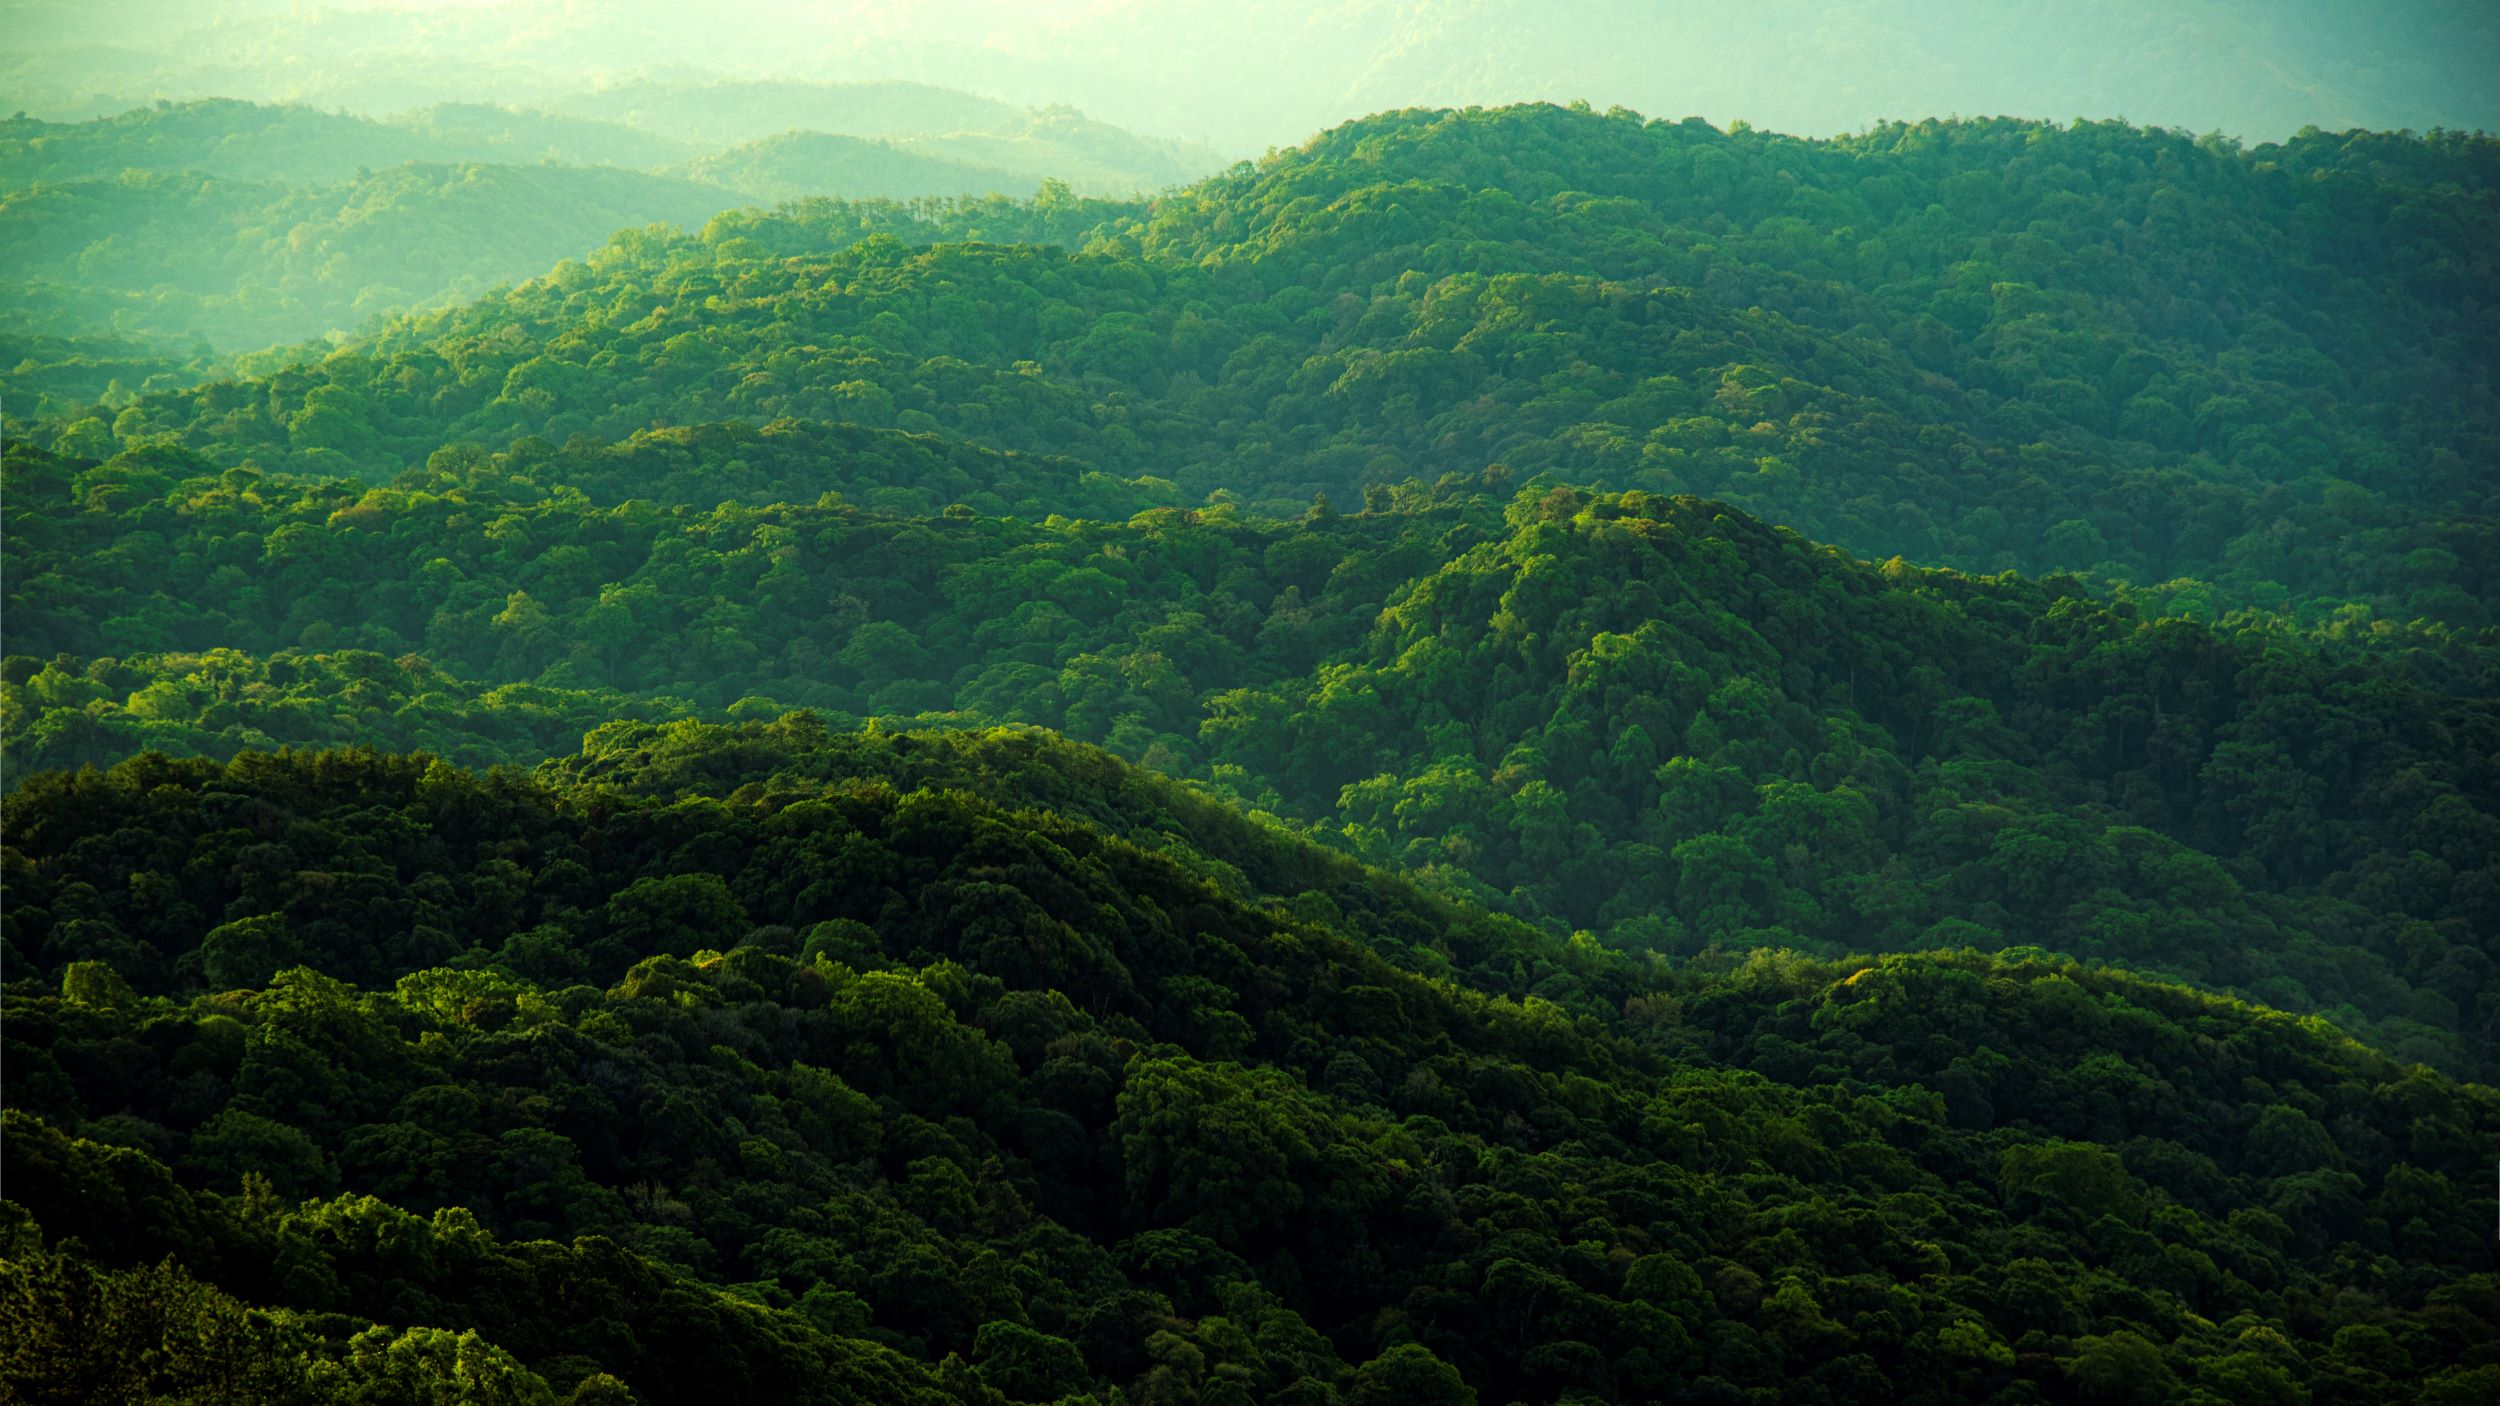 a mountainous landscape covered in trees